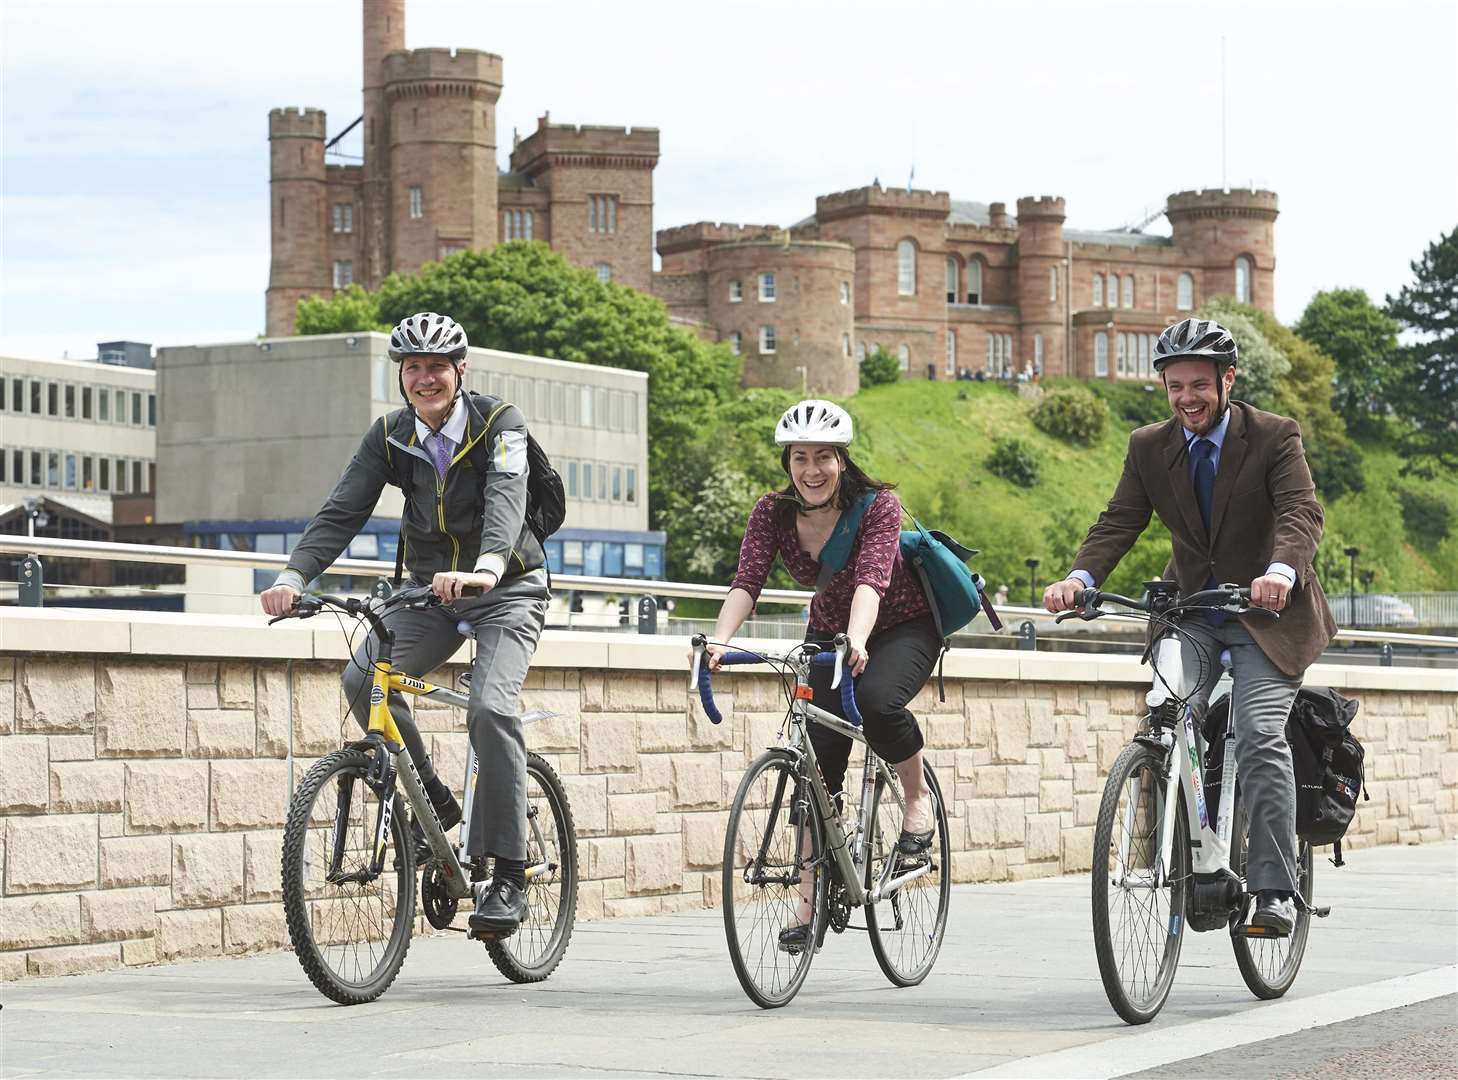 Survey suggests more bike lanes would encourage more cycling in Inverness.